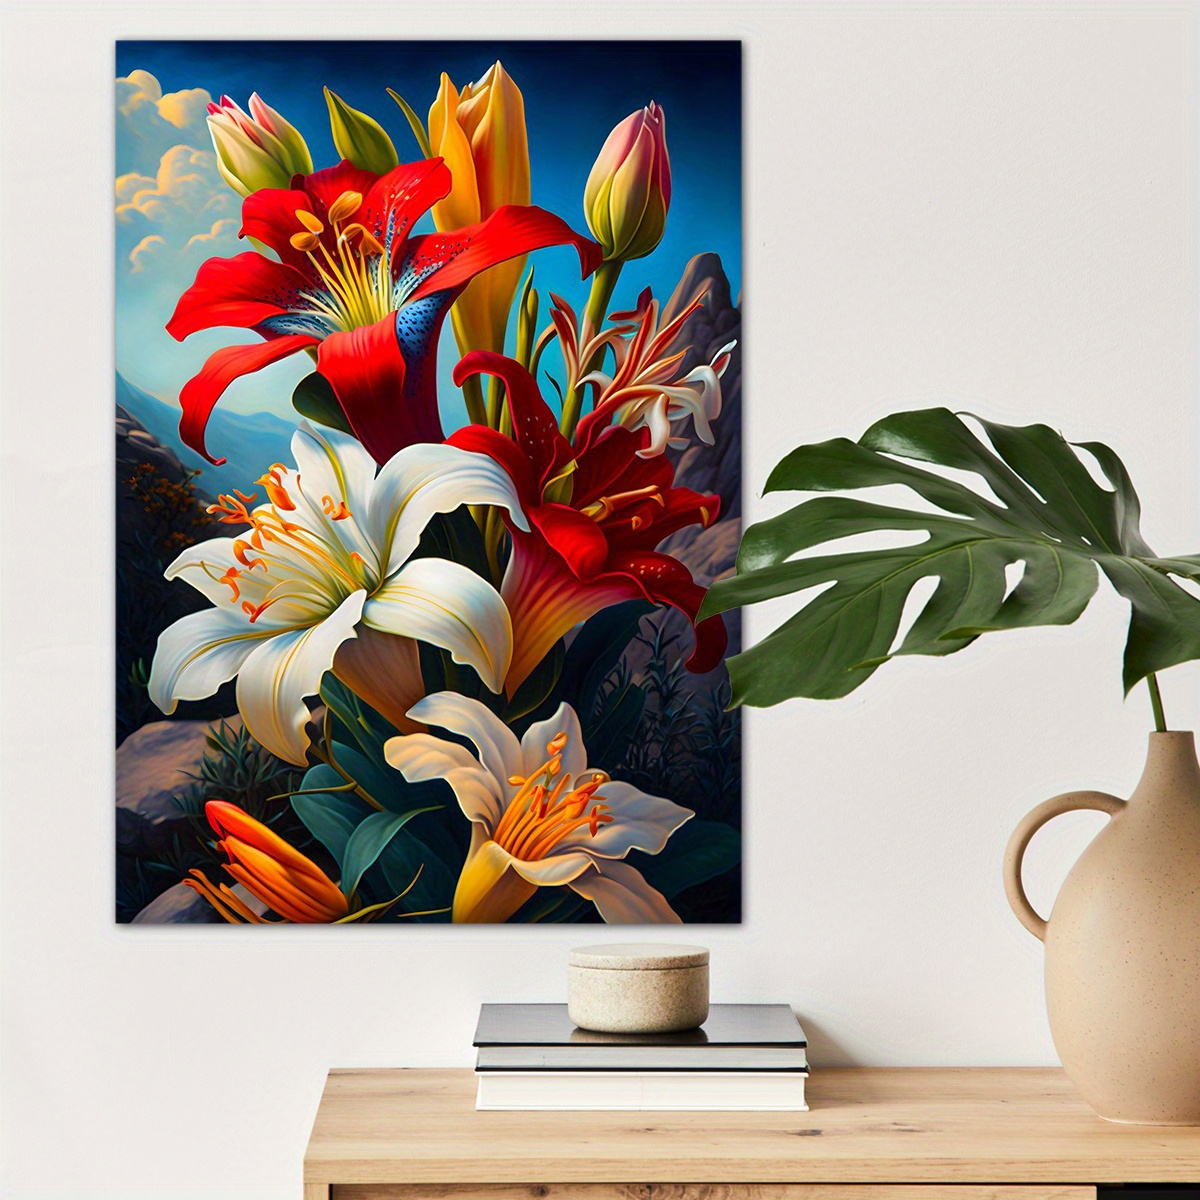 

1pc Colorful Flowers Canvas Wall Art For Home Decor, Modern Poster Wall Decor, Watercolor Canvas Prints For Living Room Bedroom Kitchen Office Cafe Decor, Perfect Gift And Decoration